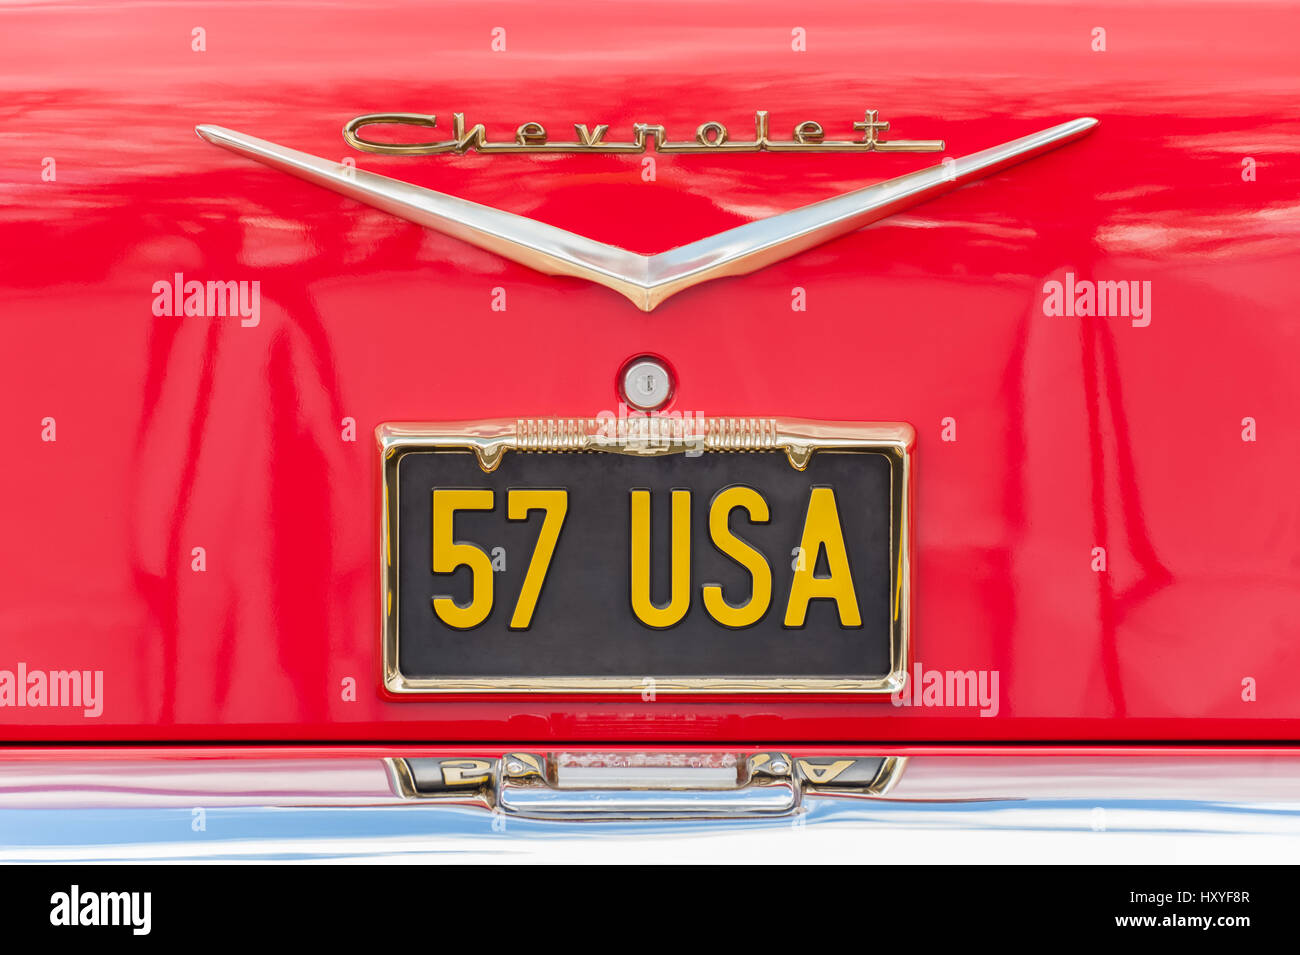 FARNBOROUGH, UK - MARCH 29: Unique Chevrolet vehicle licence plate, circa 1957 on display at the annual Wheels Day auto and bike show on March 29, 201 Stock Photo